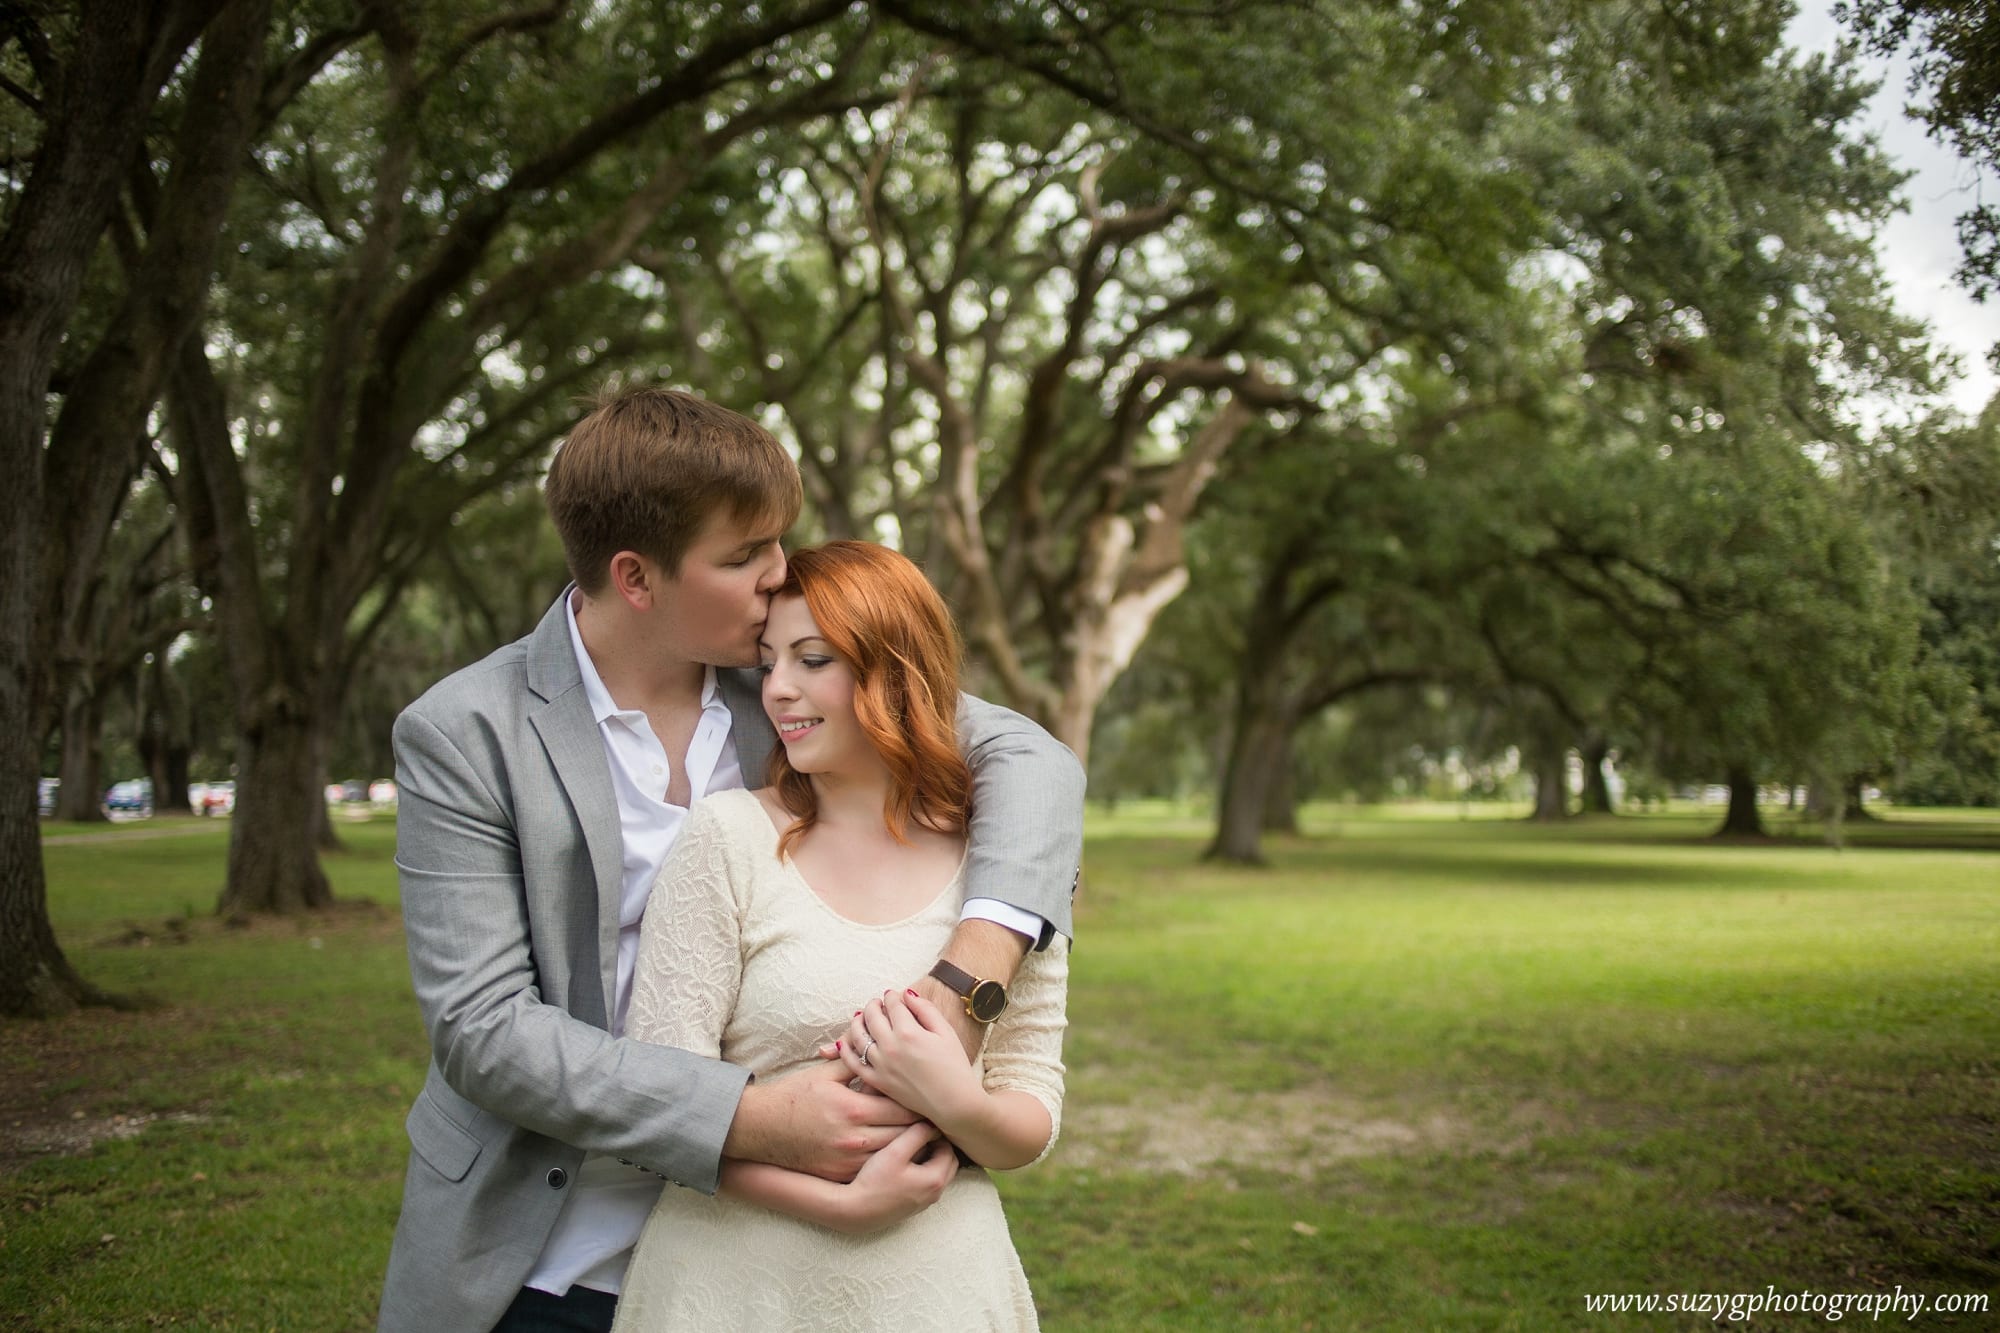 engagements-new orleans-texas-baton rouge-lake charles-suzy g-photography-suzygphotography_0130